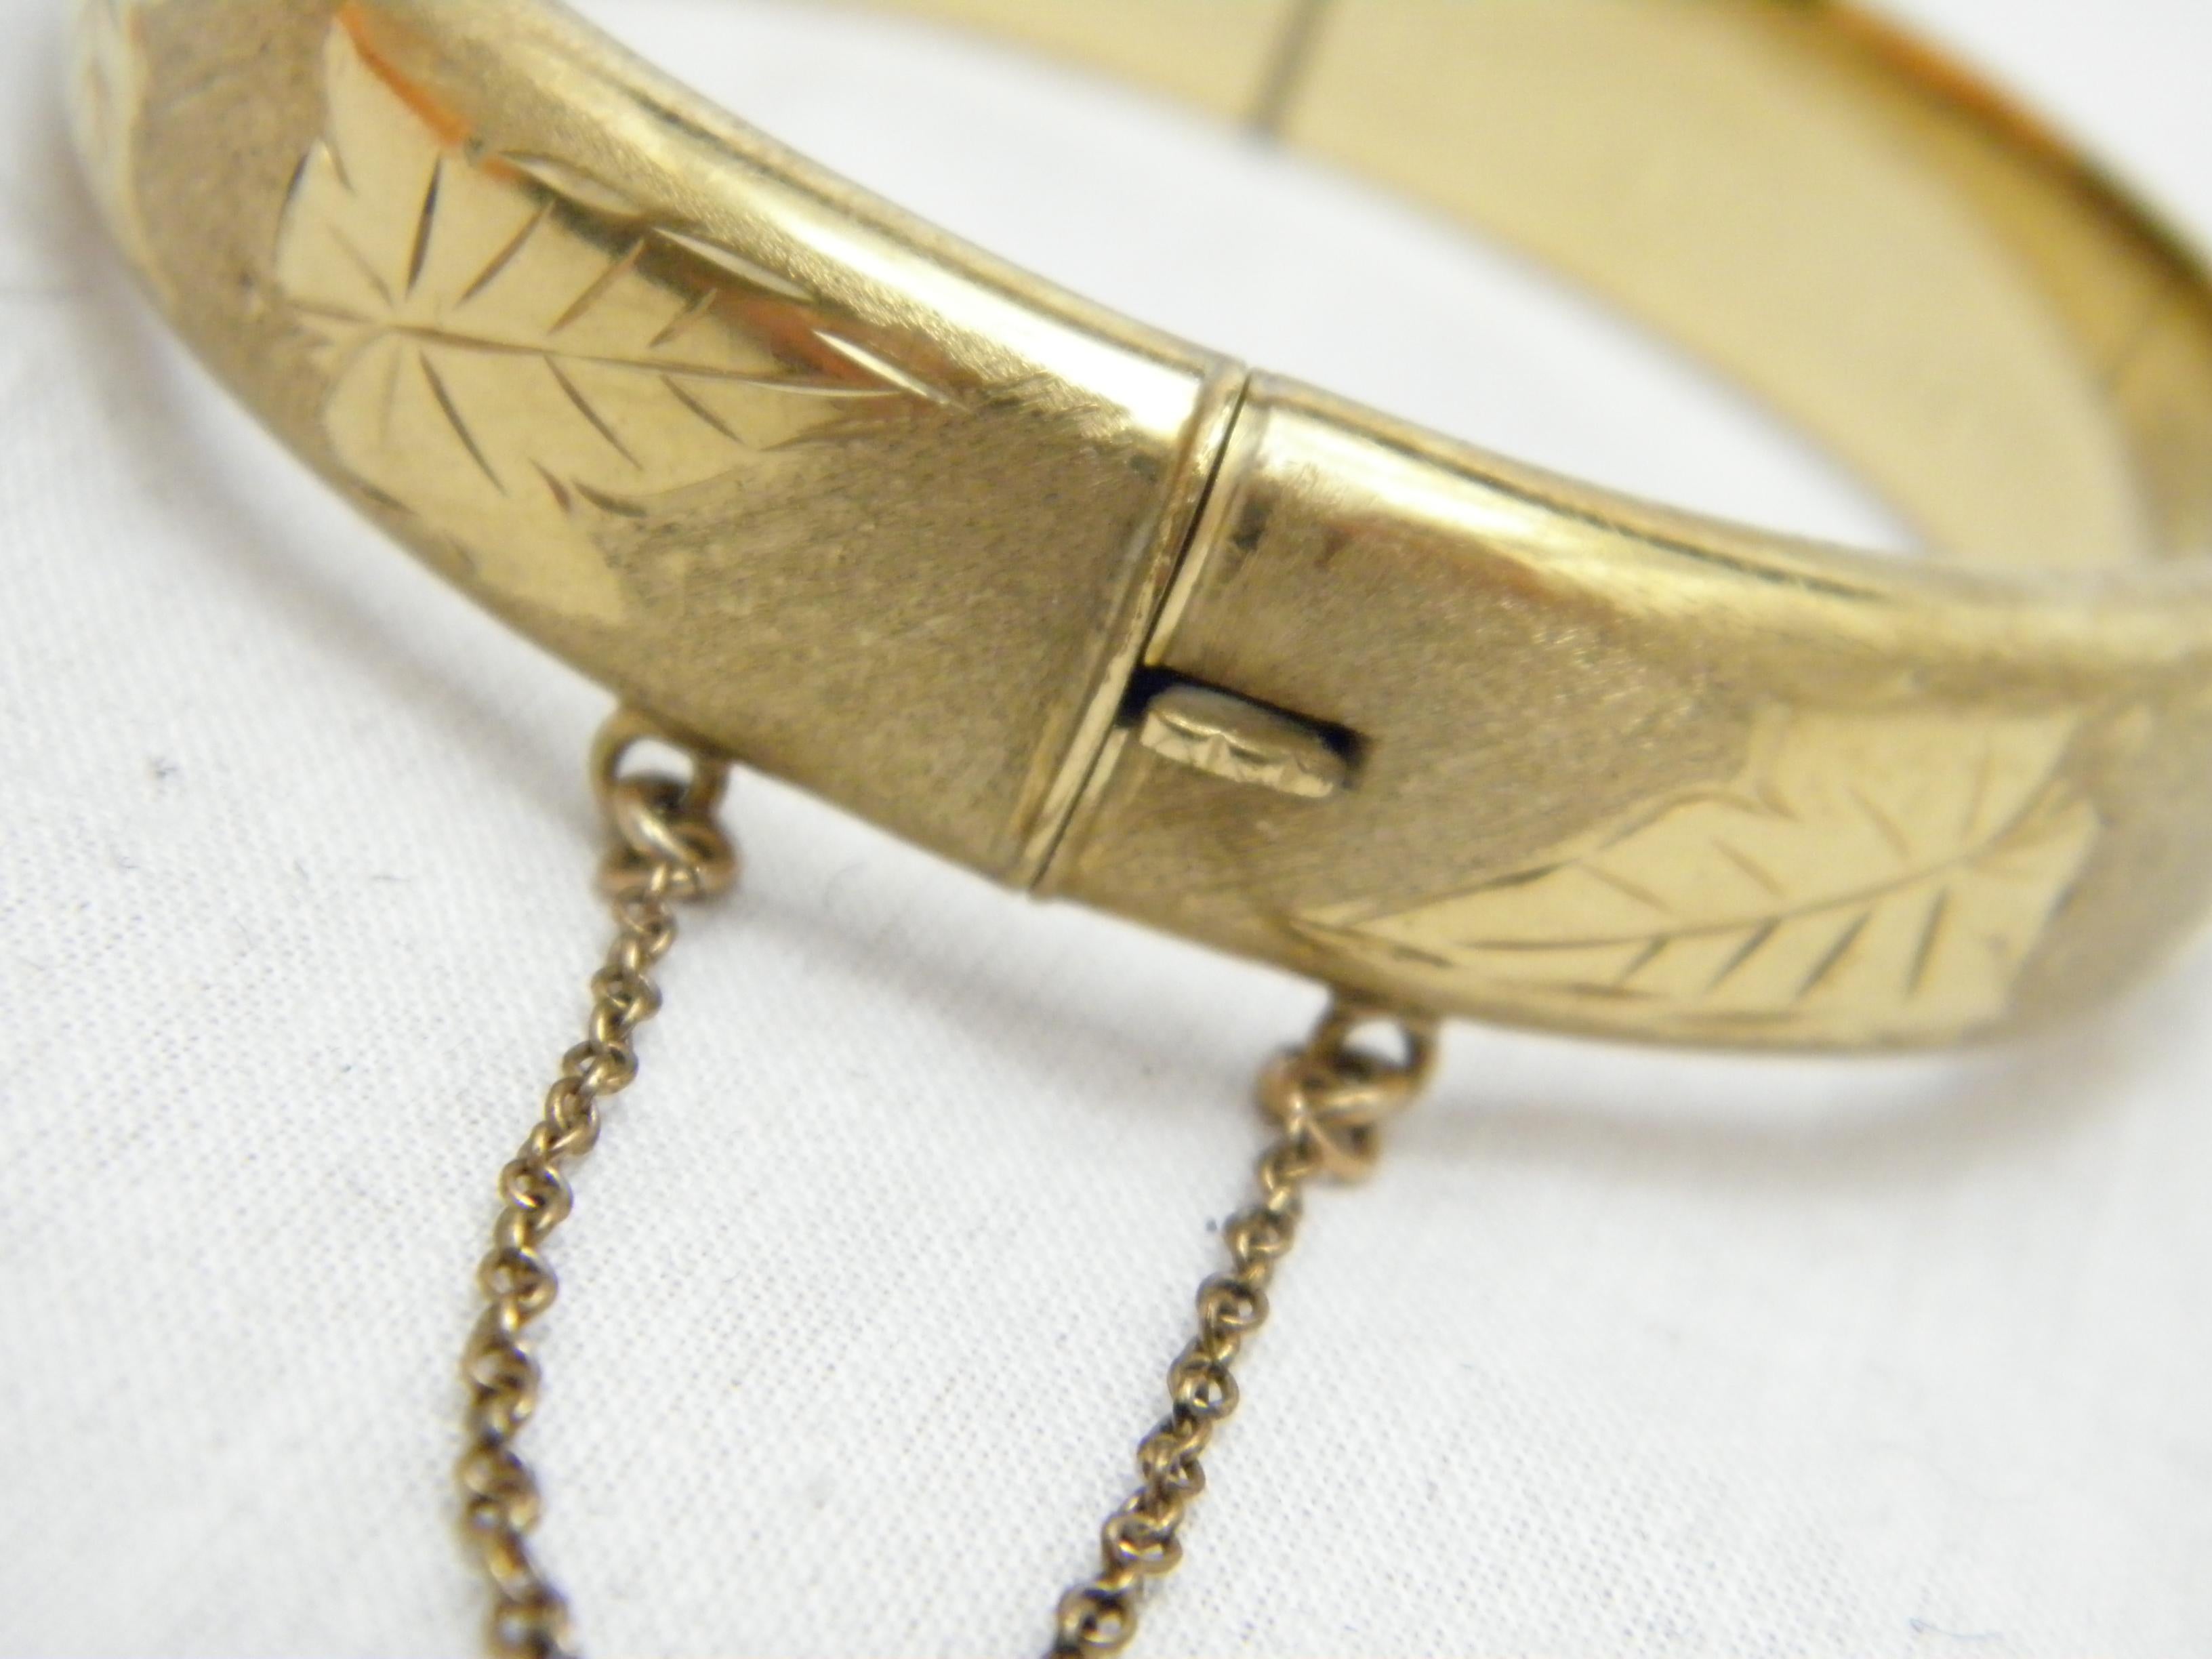 Vintage 12ct Gold 'Rolled' Floral Cuff Bracelet Bangle 500 Purity Heavy 21g For Sale 1